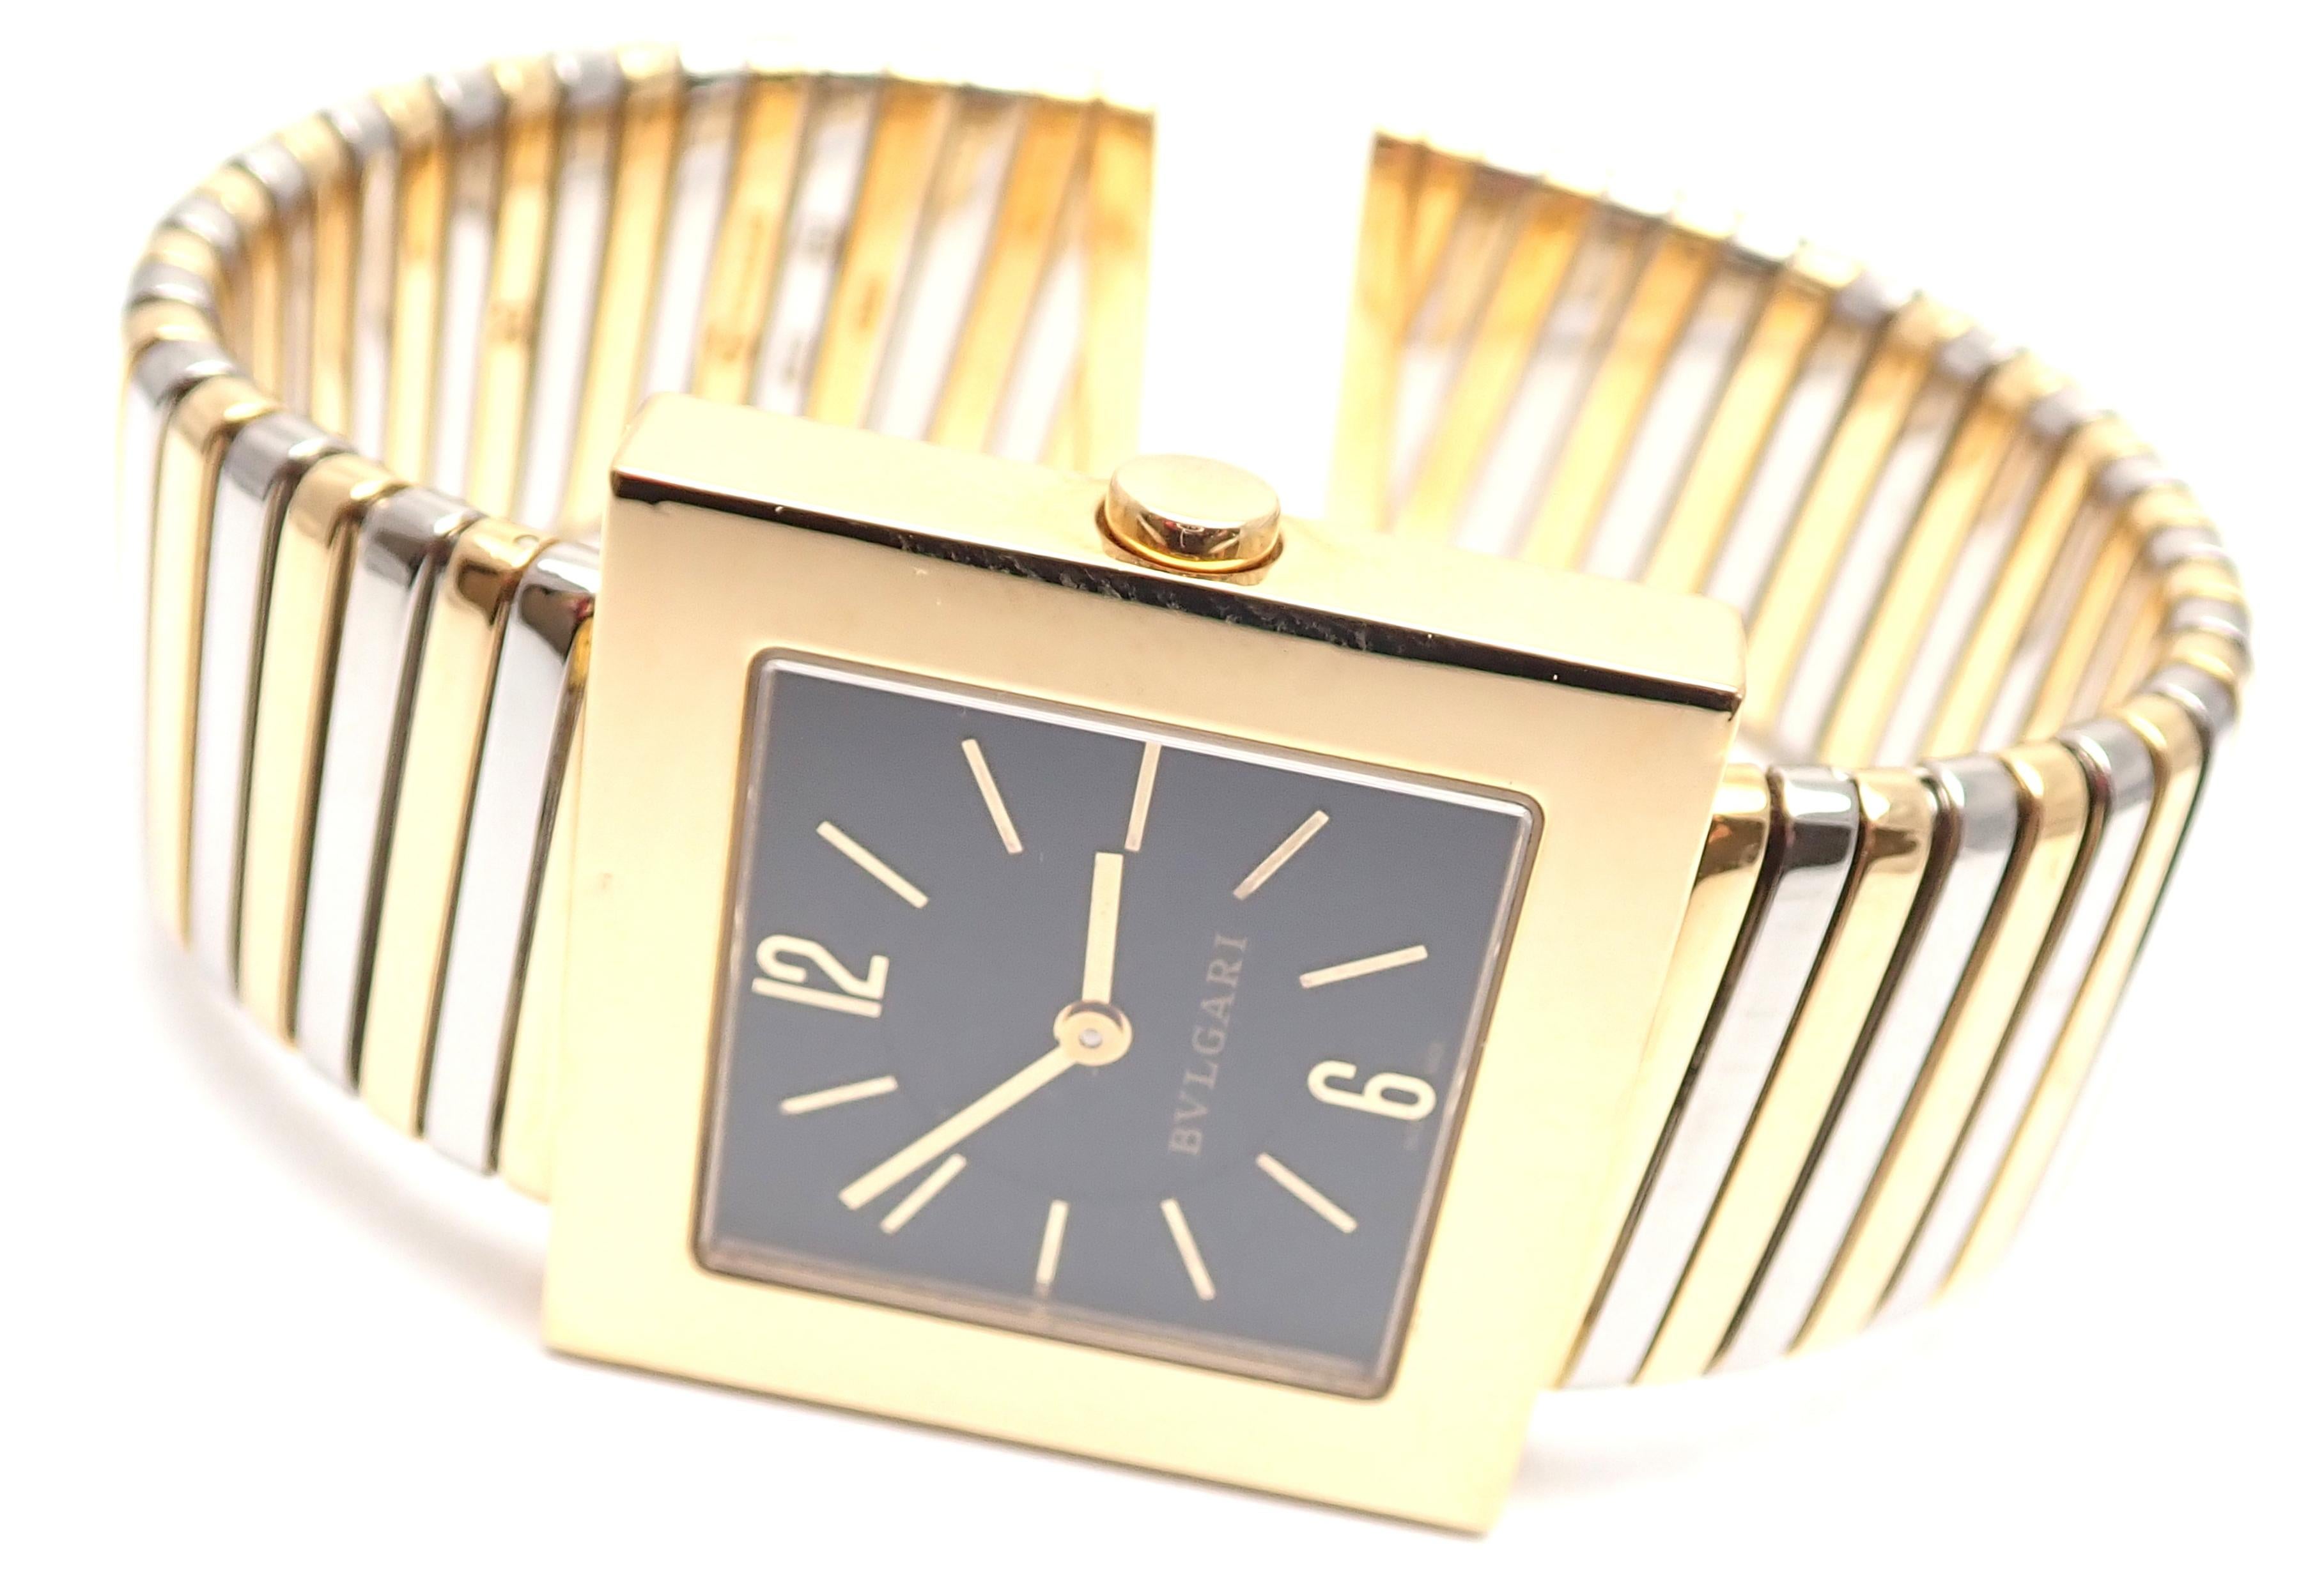 18k yellow gold and stainless steel Tubogas Quadrato bracelet watch. 
Details:
Model: SQ292T
Movement Type: Quartz
Case Size: case diameter: 29mm
Crystal: Anti-glare Sapphire
Wrist Size: 7 3/4 to 8 inches, this design is flexible so it will fit most